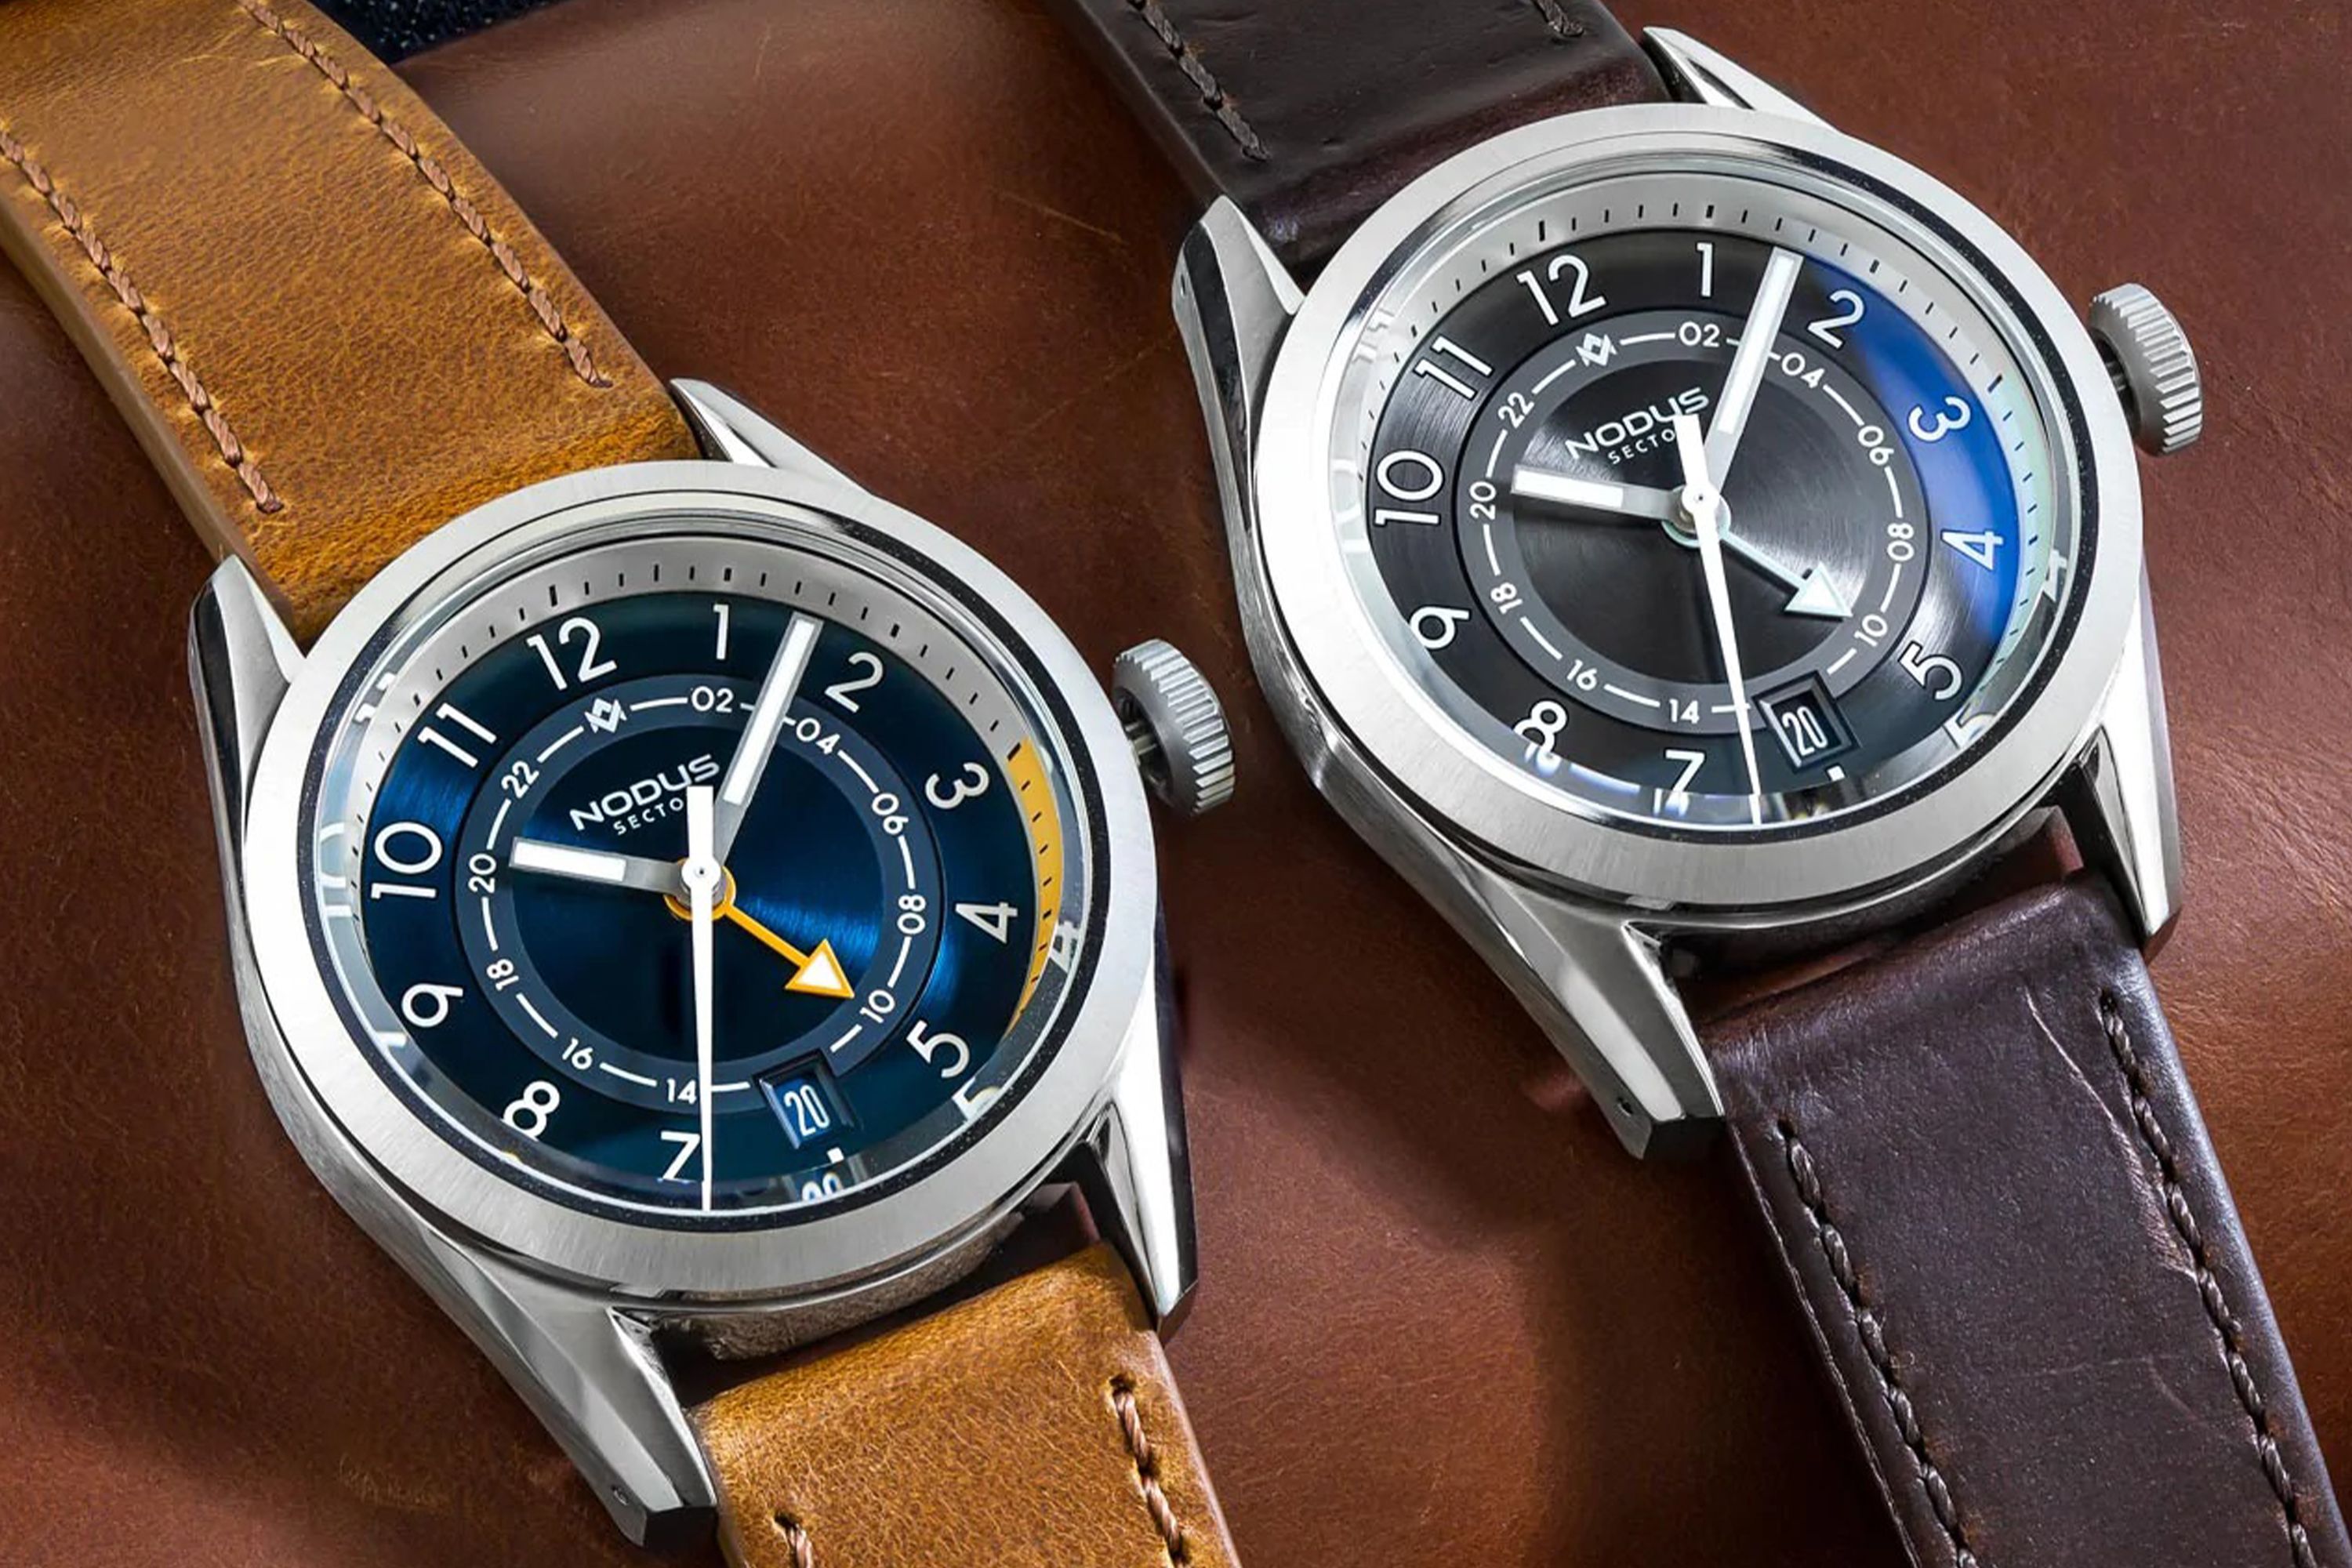 Seiko's New GMT Movement Finds Its Way Into More Affordable Watches